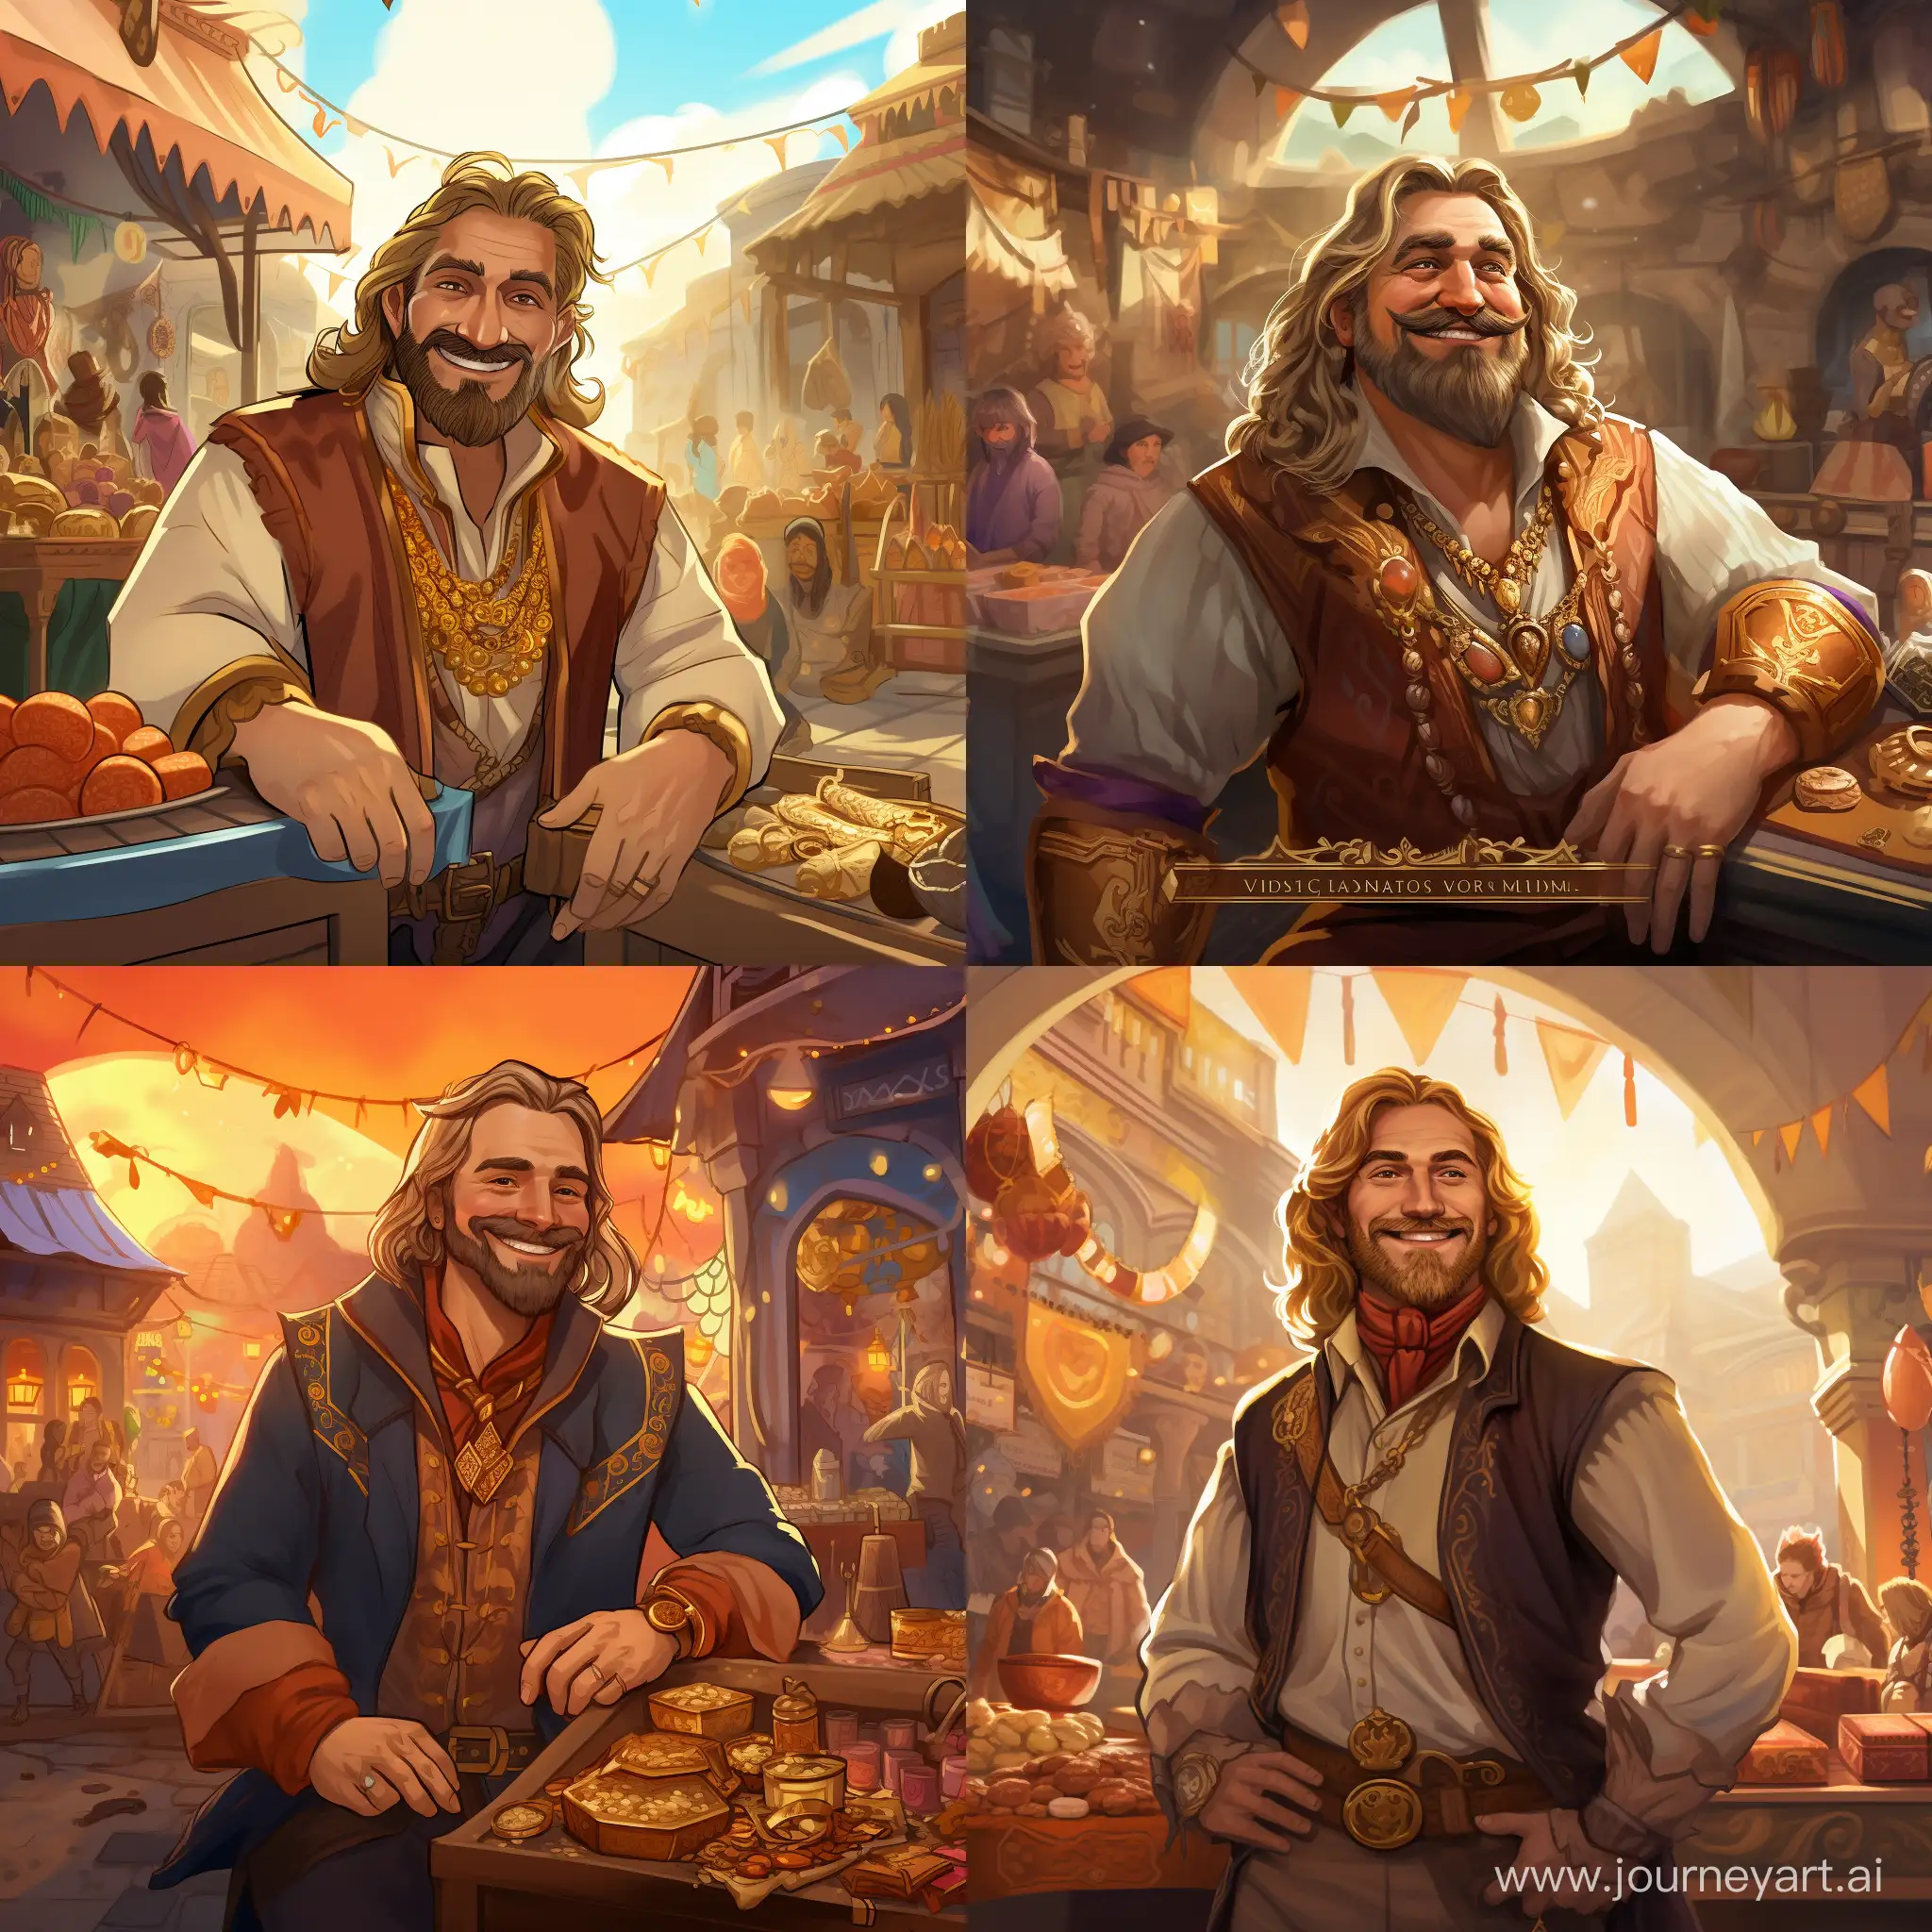 Smiling-Young-Viking-Trader-in-Luxurious-Attire-with-Precious-Stone-Rings